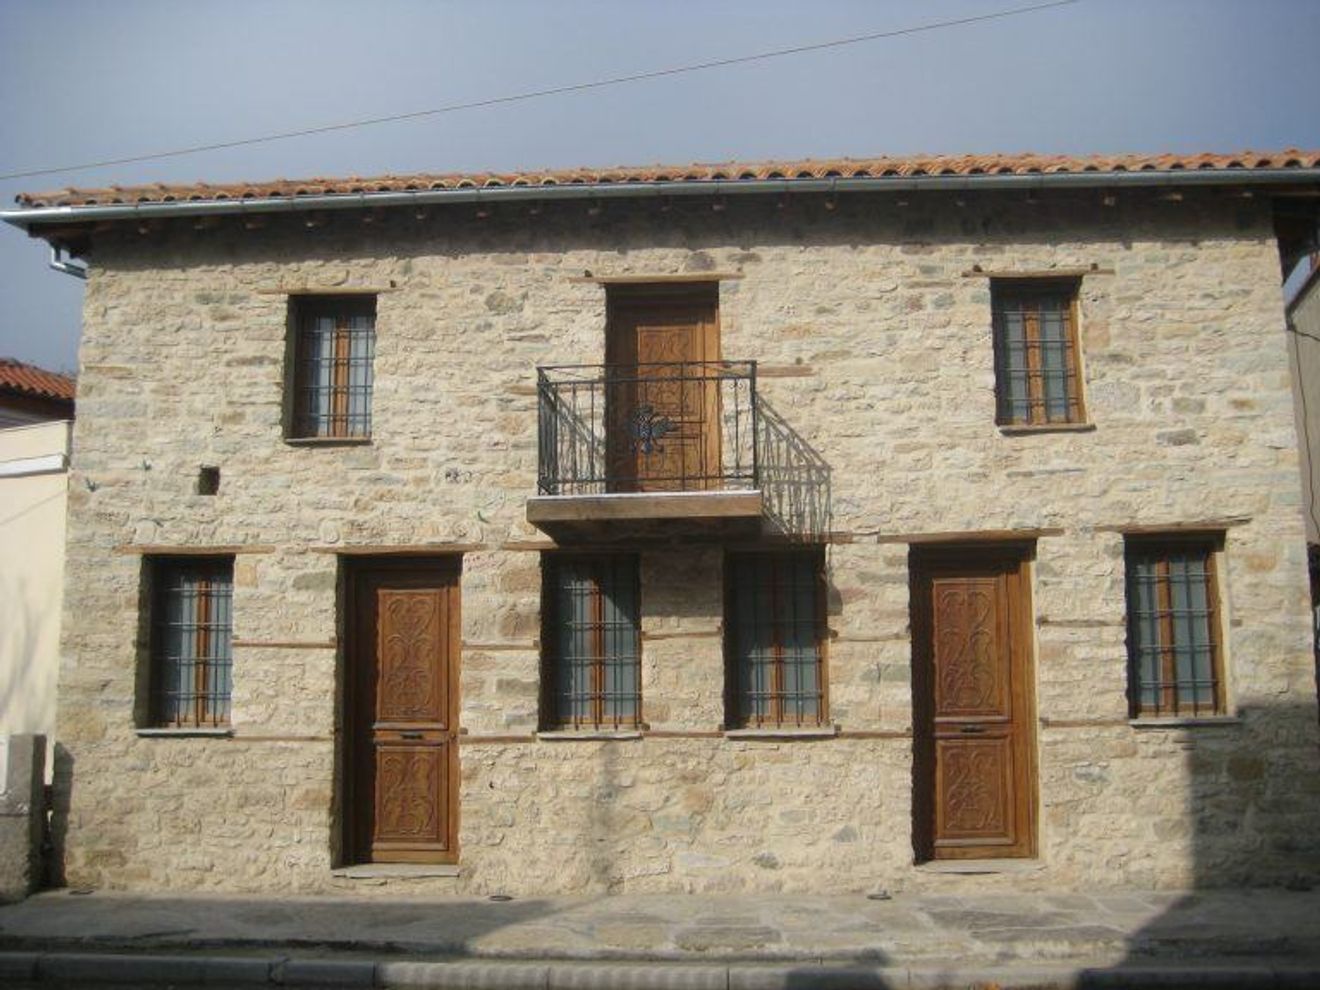 Folklore and Historical Museum of Feres